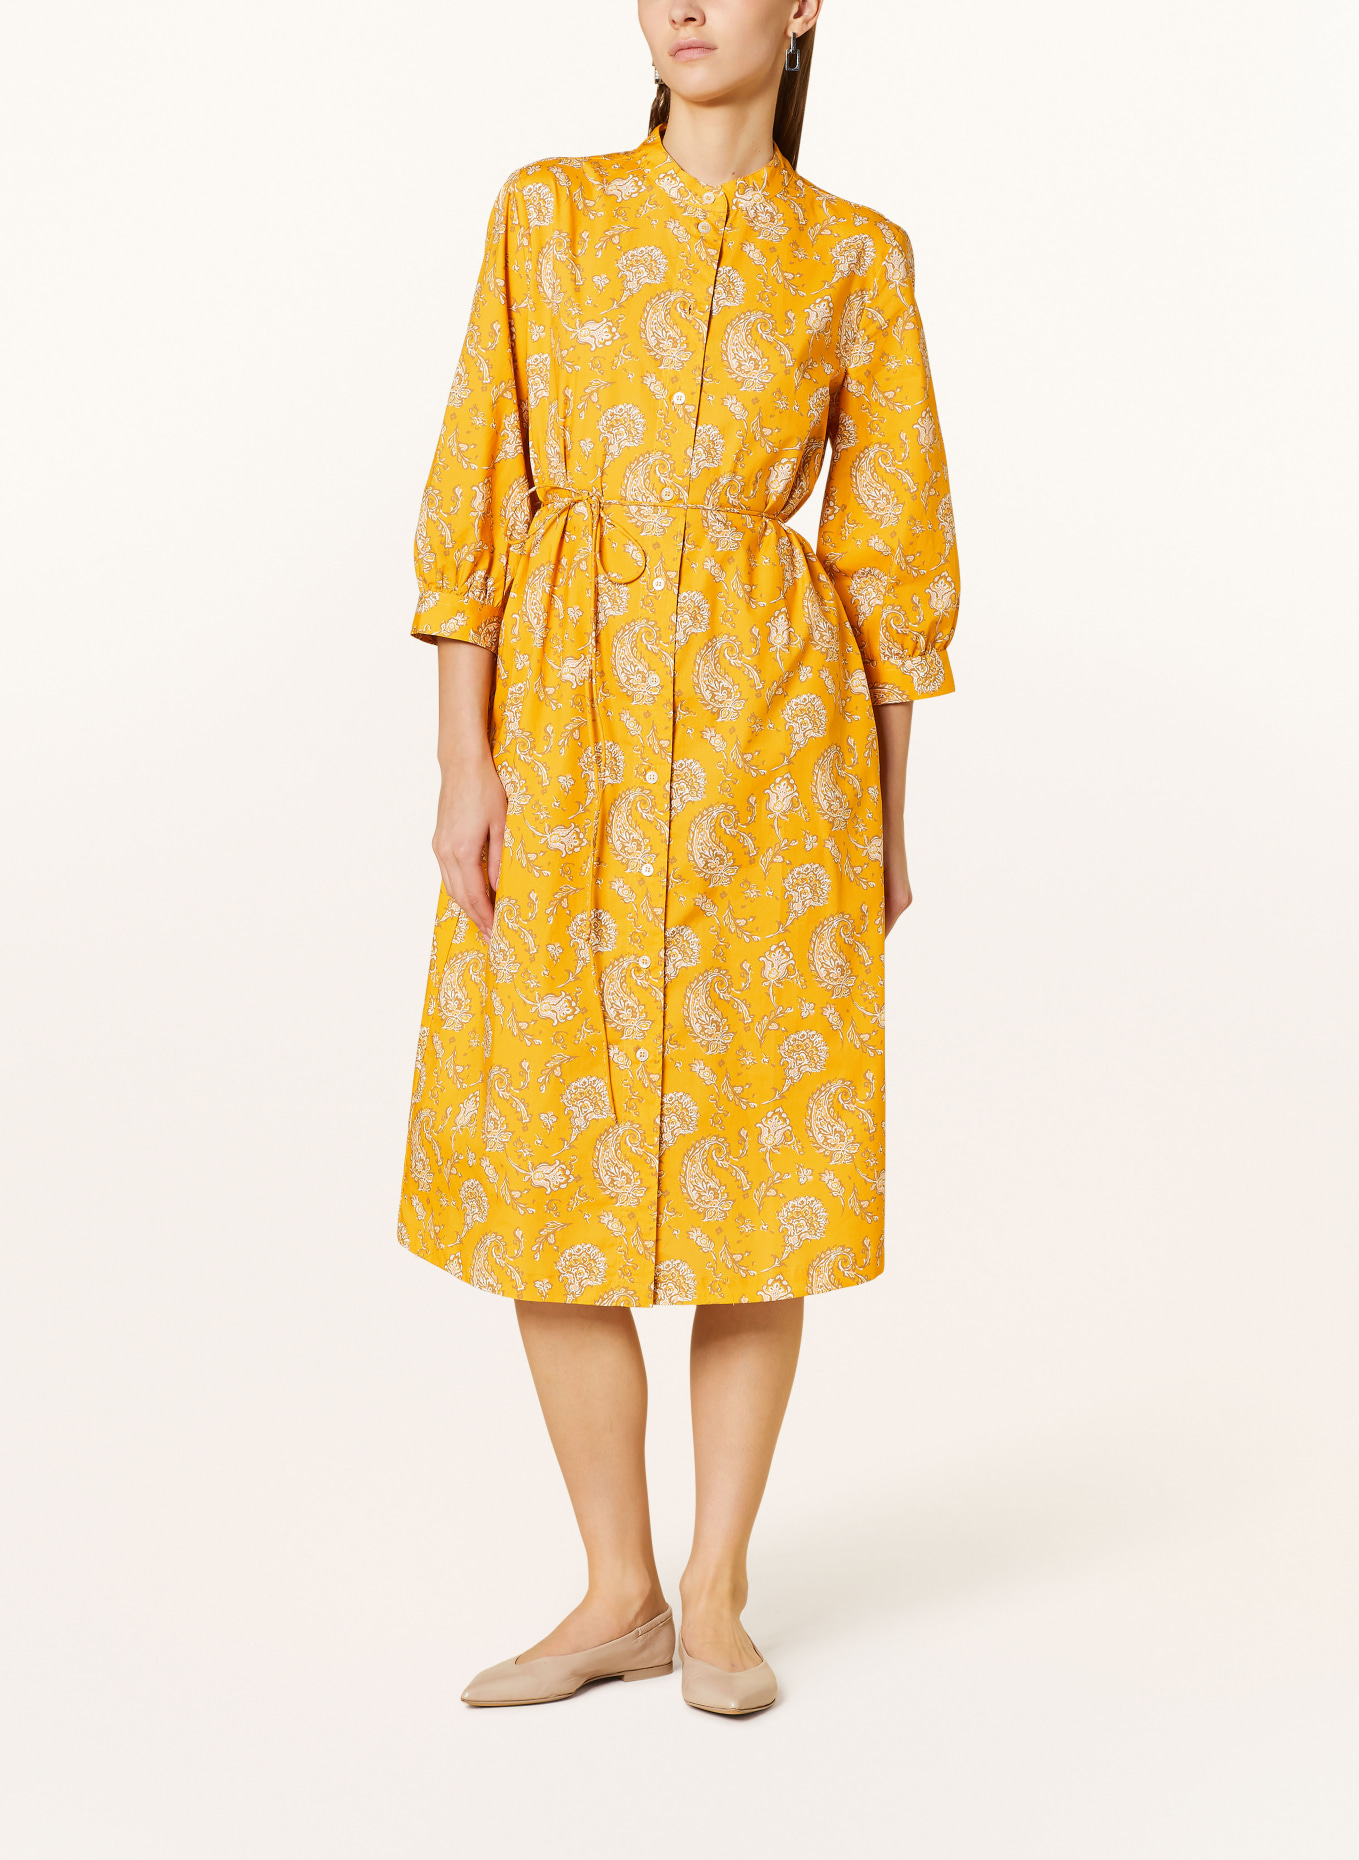 MAERZ MUENCHEN Shirt dress with 3/4 sleeves, Color: YELLOW/ WHITE/ BROWN (Image 2)